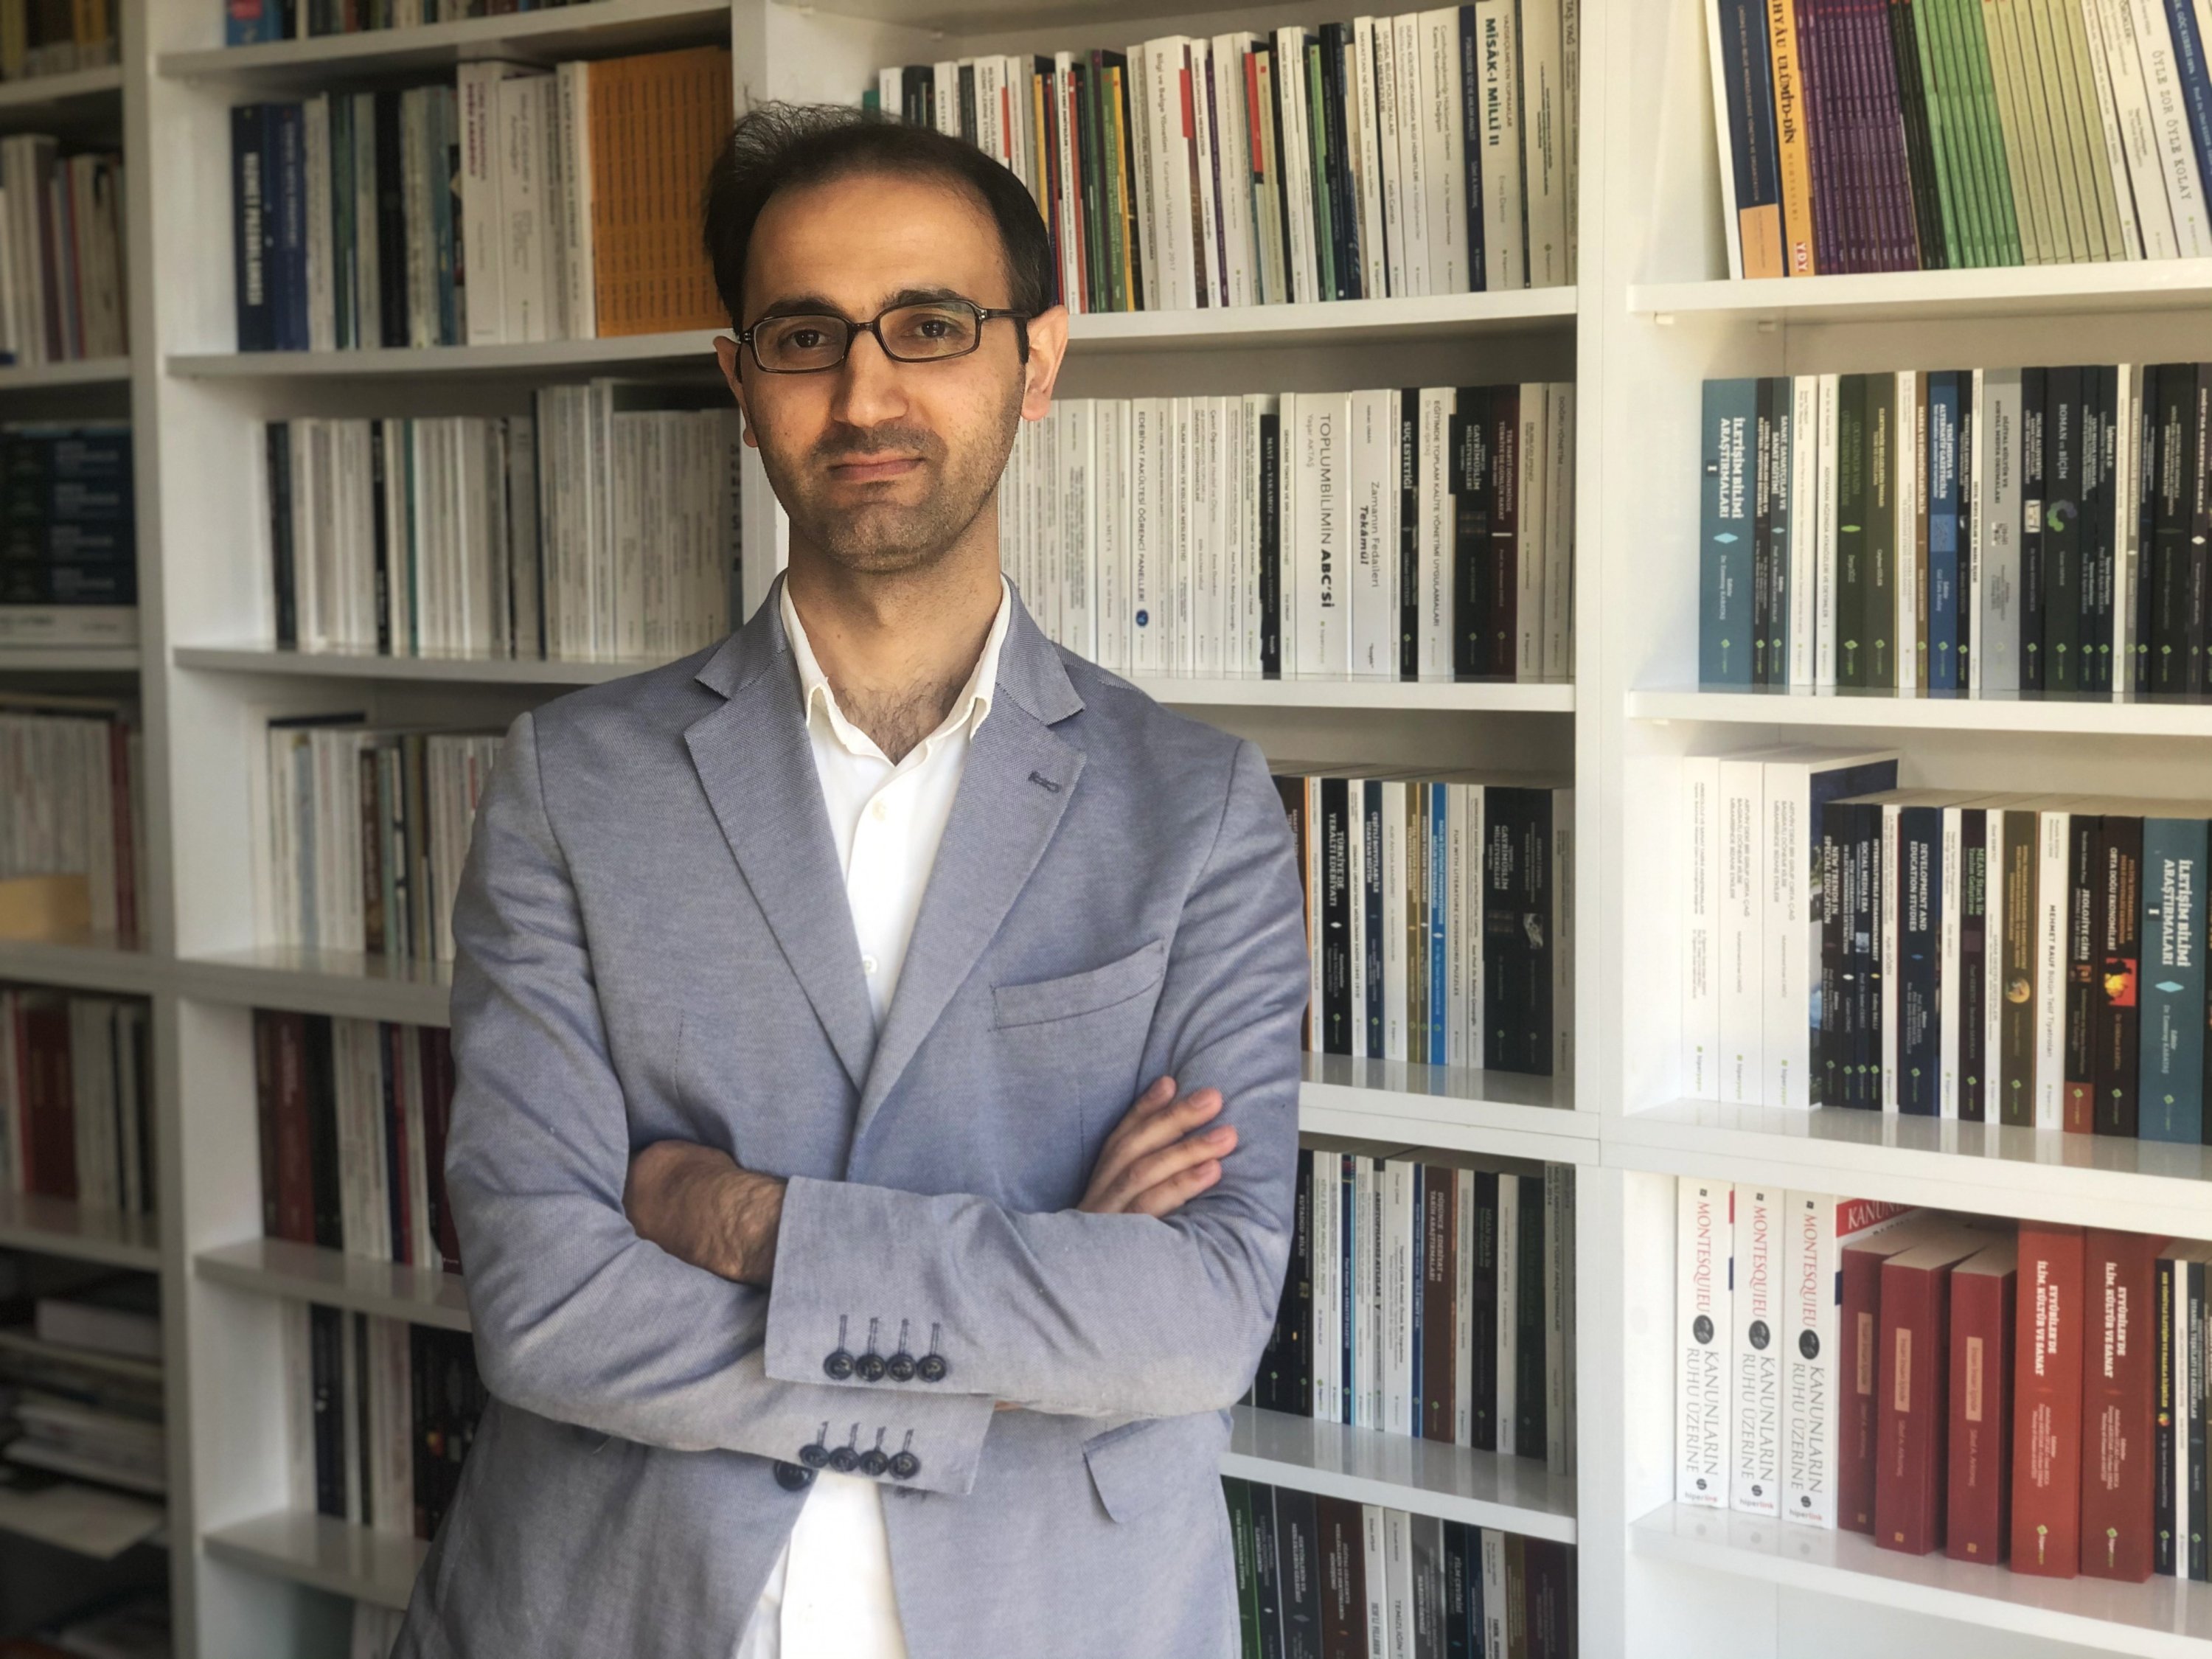 Harun Tuncer, project consultant for “WikiLala” and associate professor at Istanbul Aydın University, poses for a photo, Istanbul, Turkey, April 22, 2021. (IHA Photo)